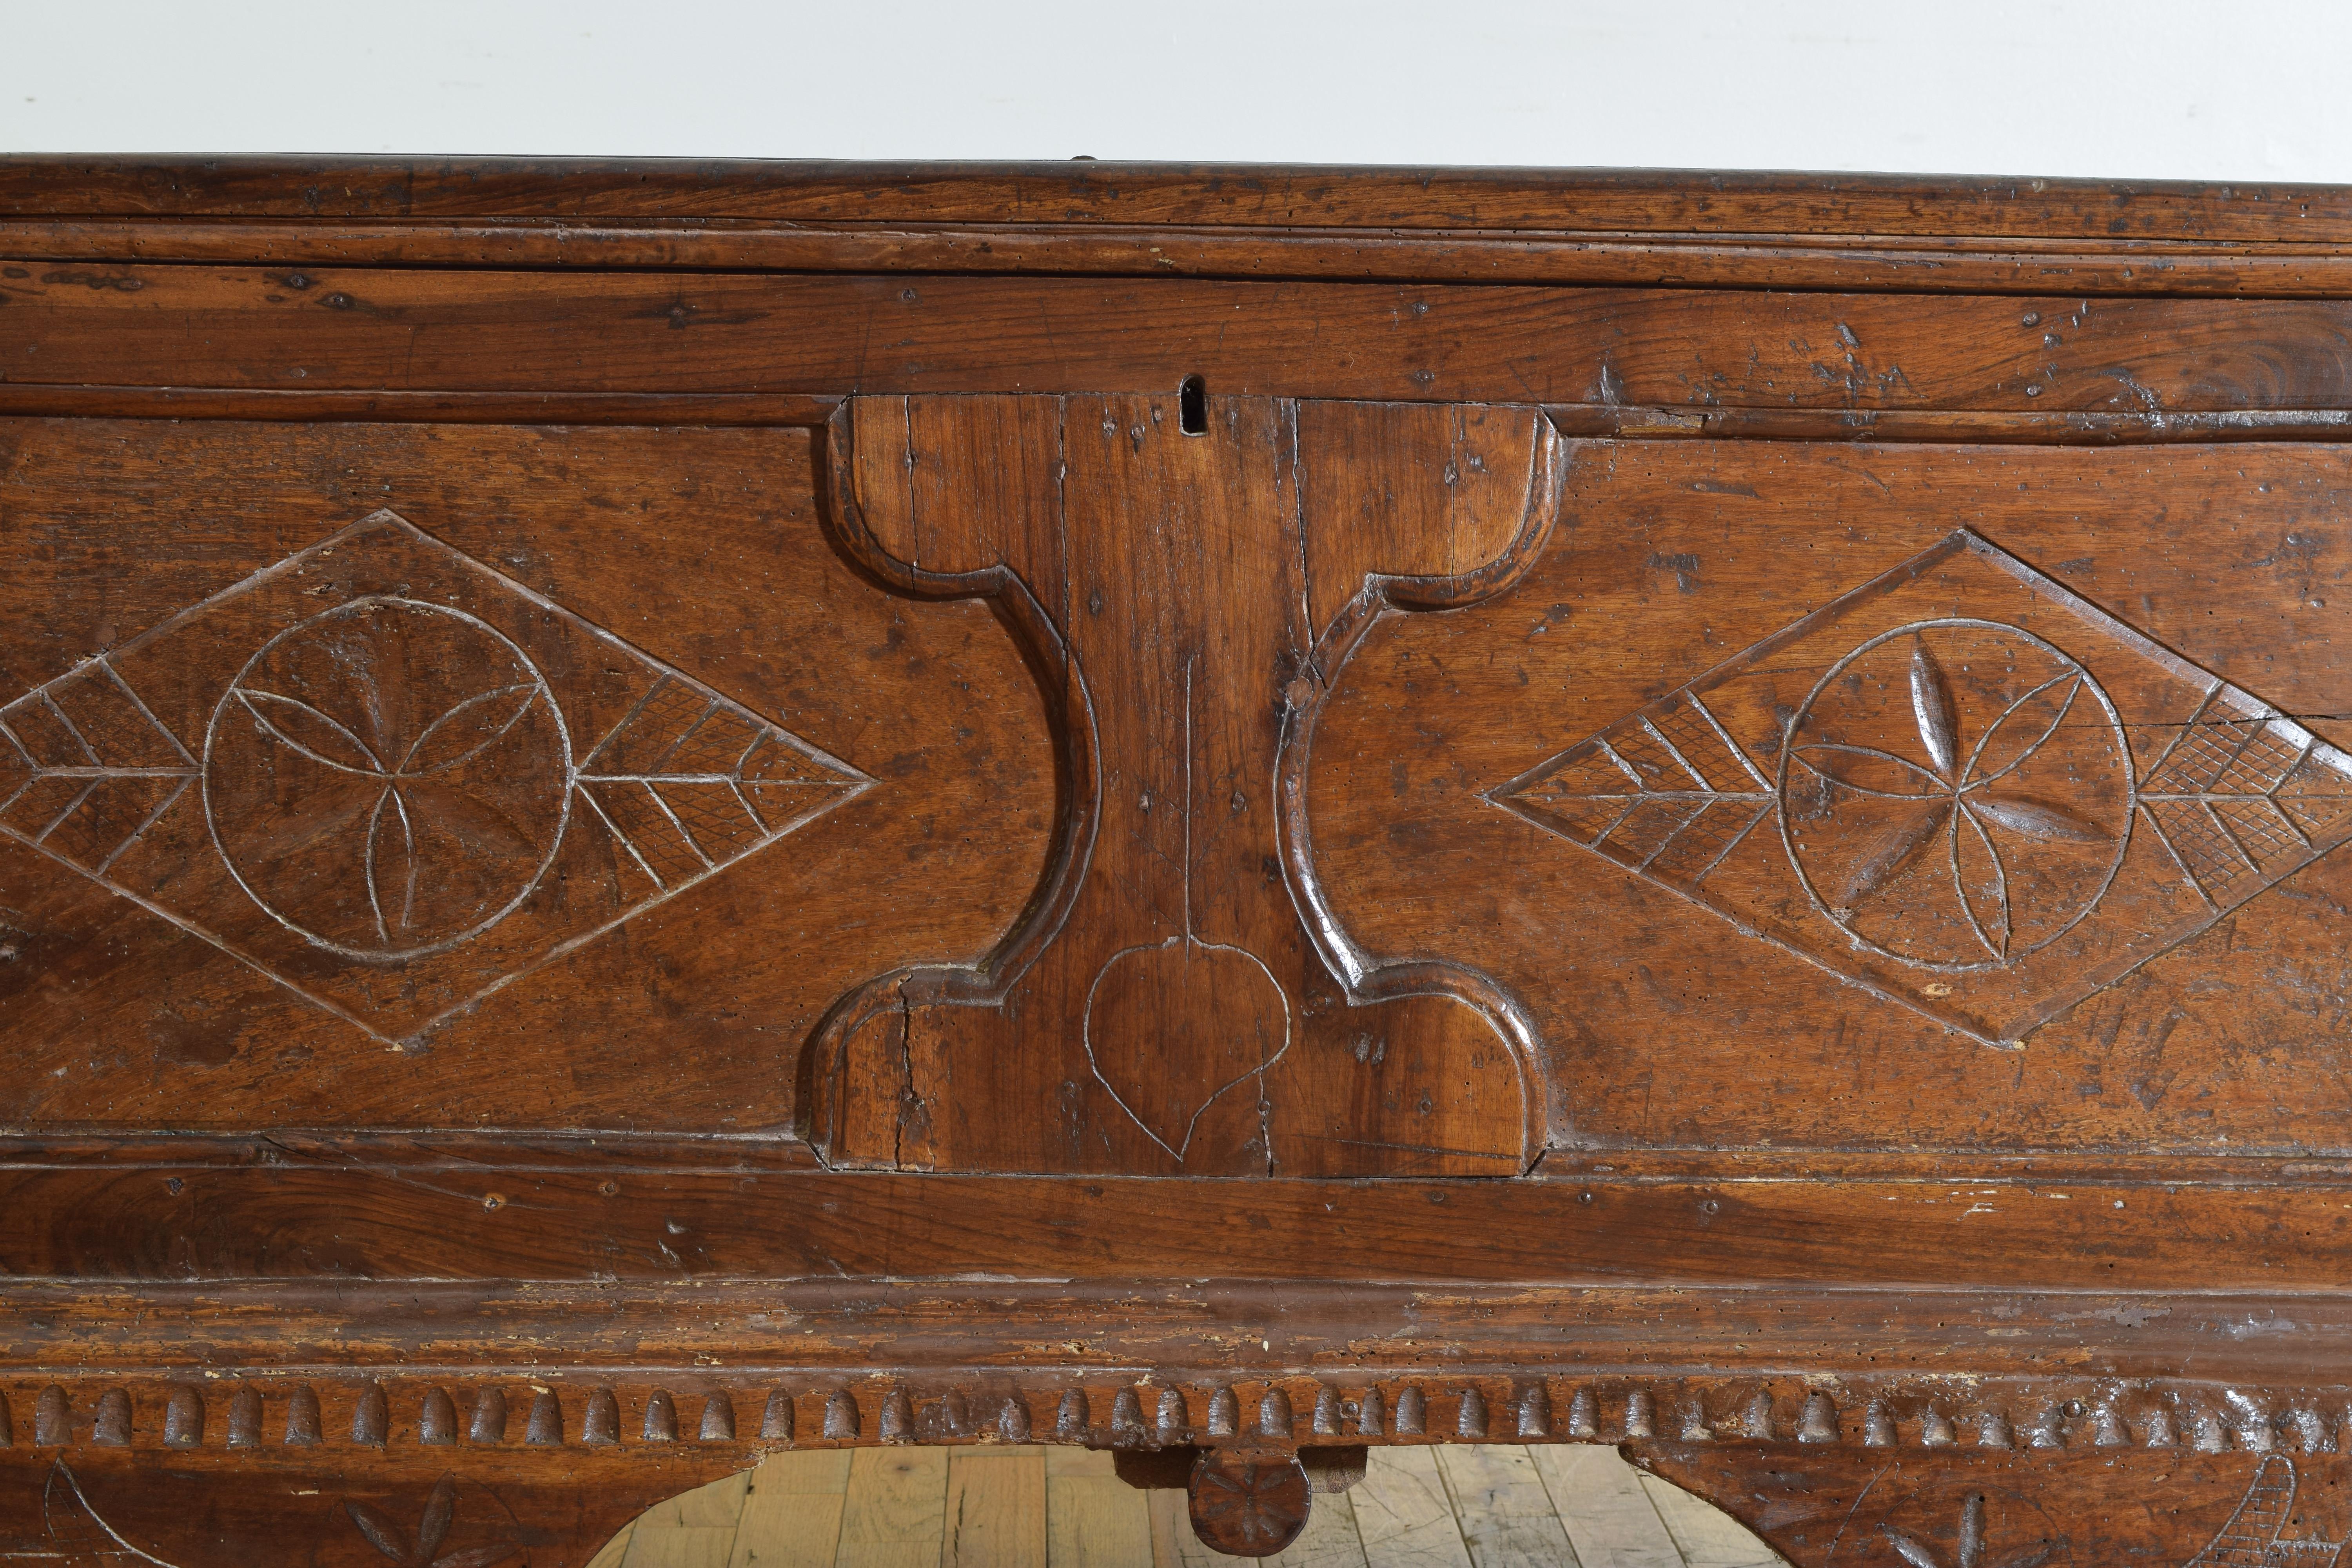 Italian / Southern Tyrolean Carved Walnut Paneled Cassapanca, mid 17th century For Sale 3